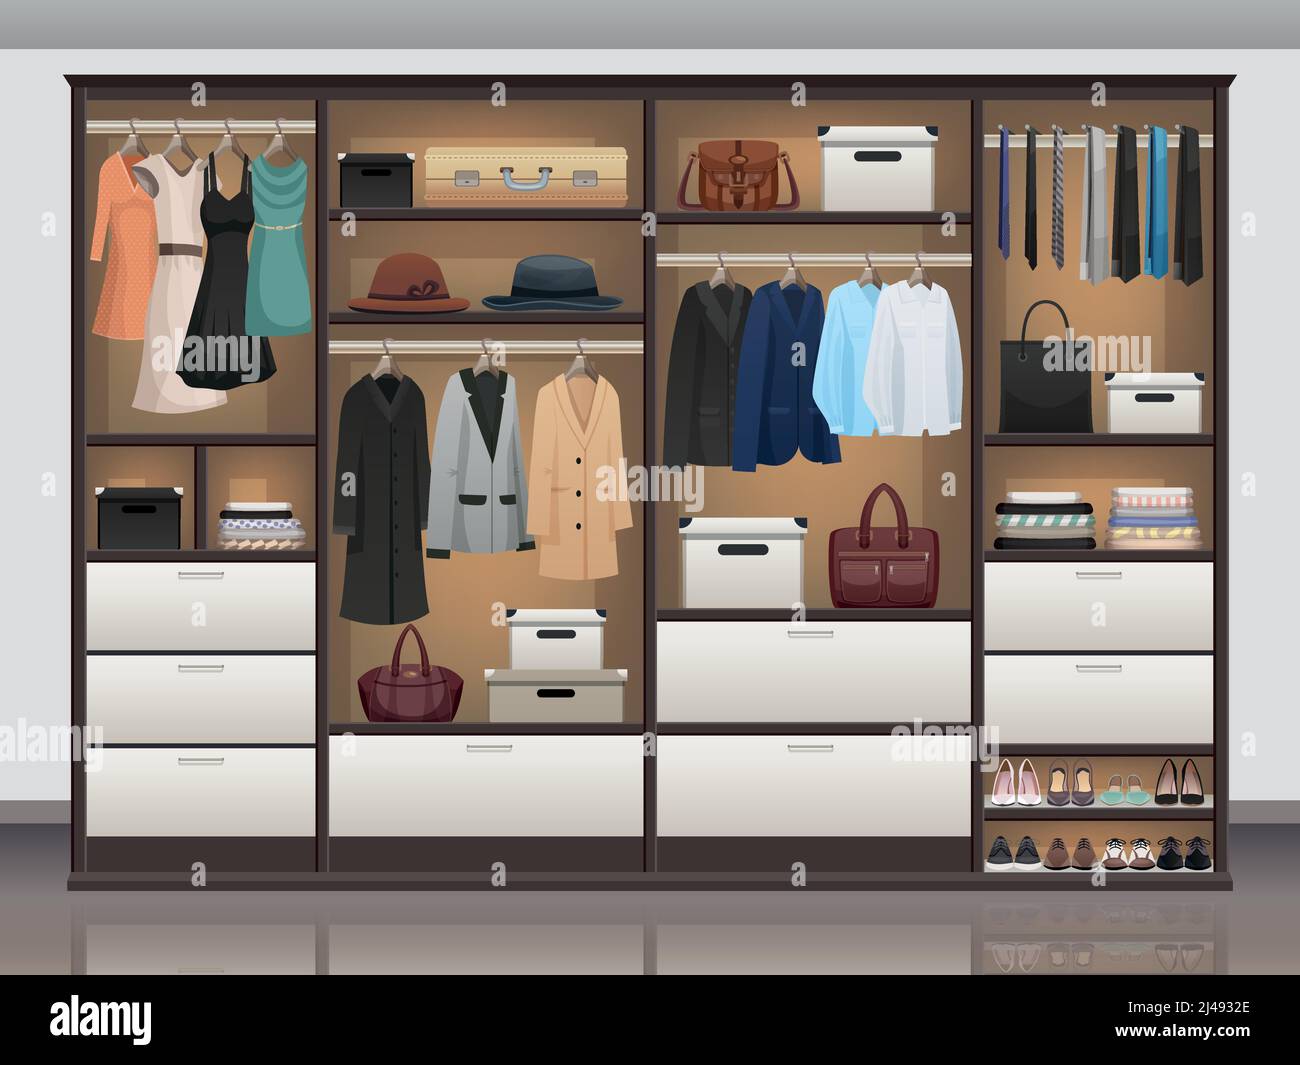 Bedroom wardrobe closet storage with interior organizers shoe racks and hanging rails for clothes realistic vector illustration Stock Vector